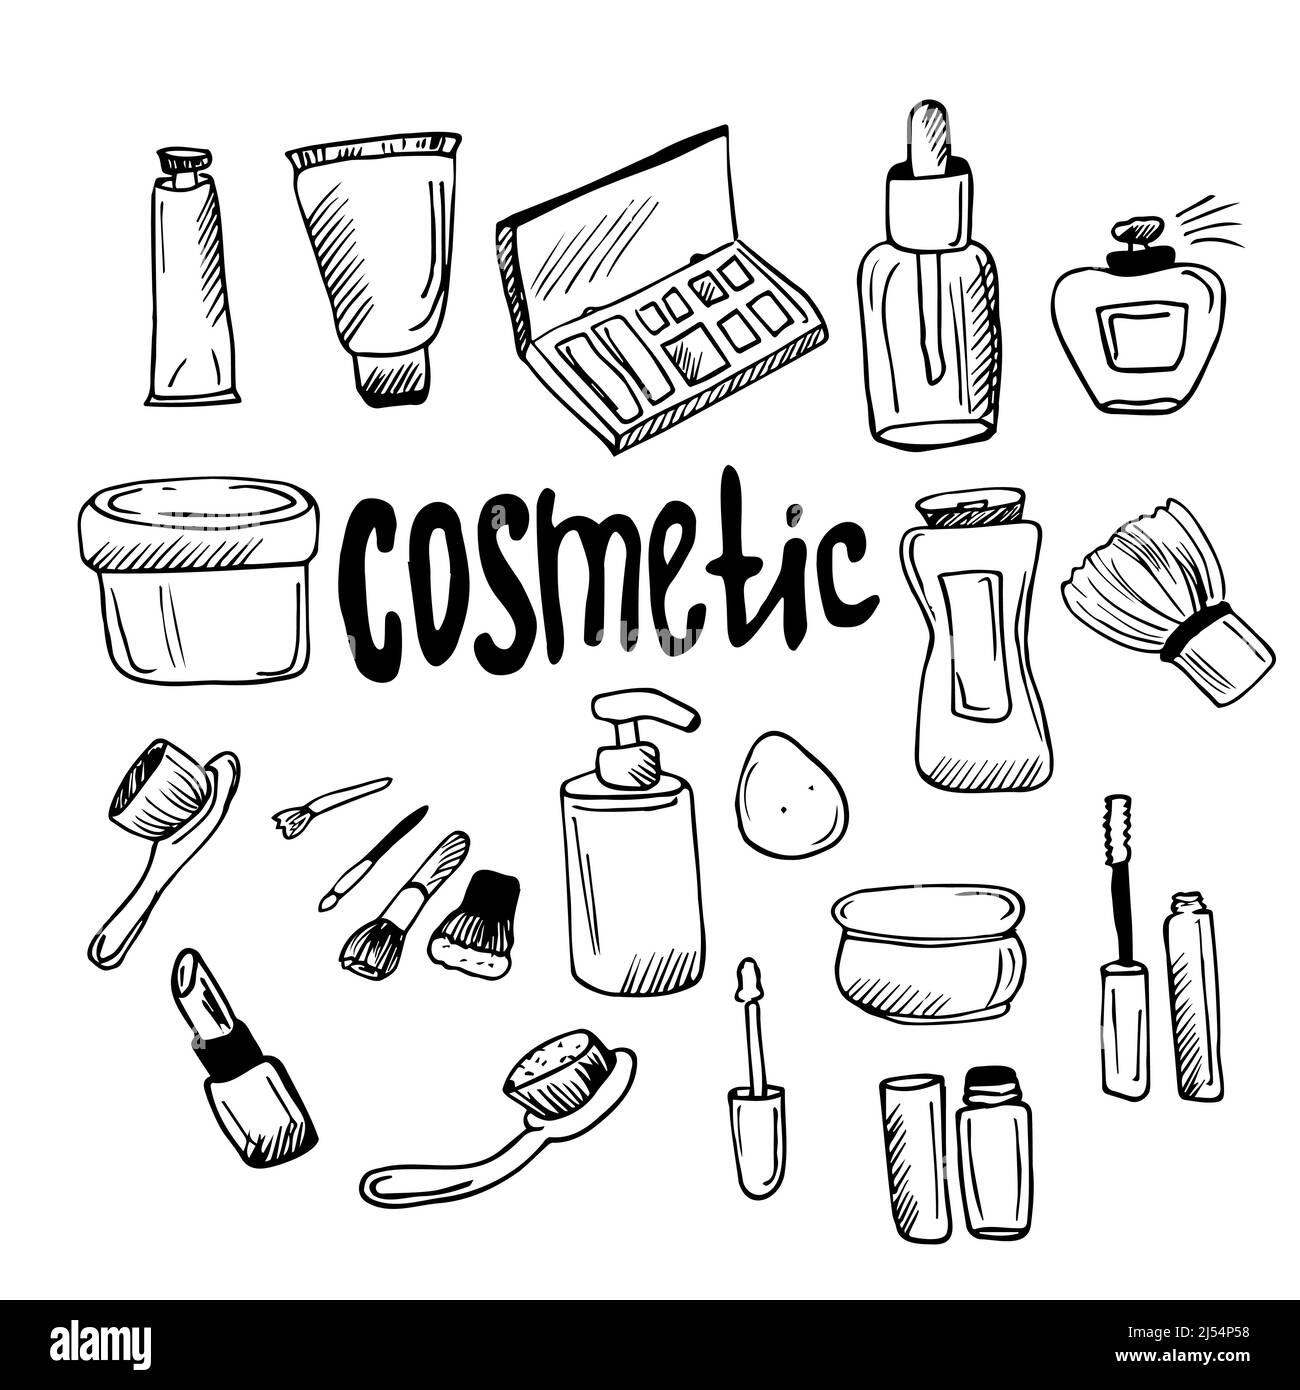 Doodle cosmetic packs set. Woman beauty products sketch collection. Cream, lotion, shampoo, lip stick, eye lashes bottles and brushes. Stock Vector